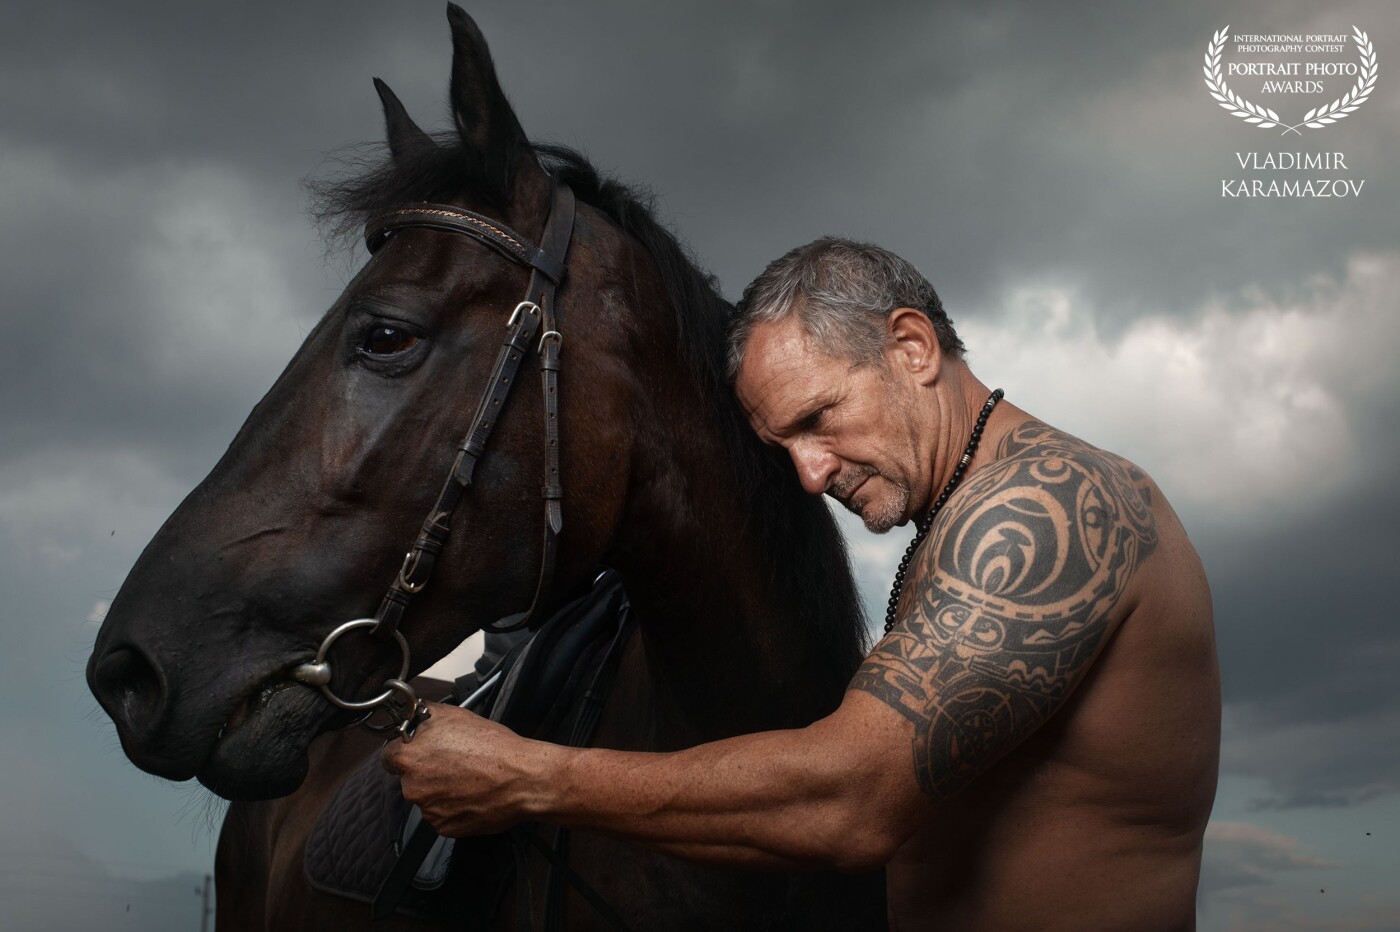 Man and horse.  Perhaps the strongest connection since centuries.  There is a lot of power in this relationship.  There is a lot of history and legends surrounding it.  Next to a strong man, there has always been a magnificent horse.